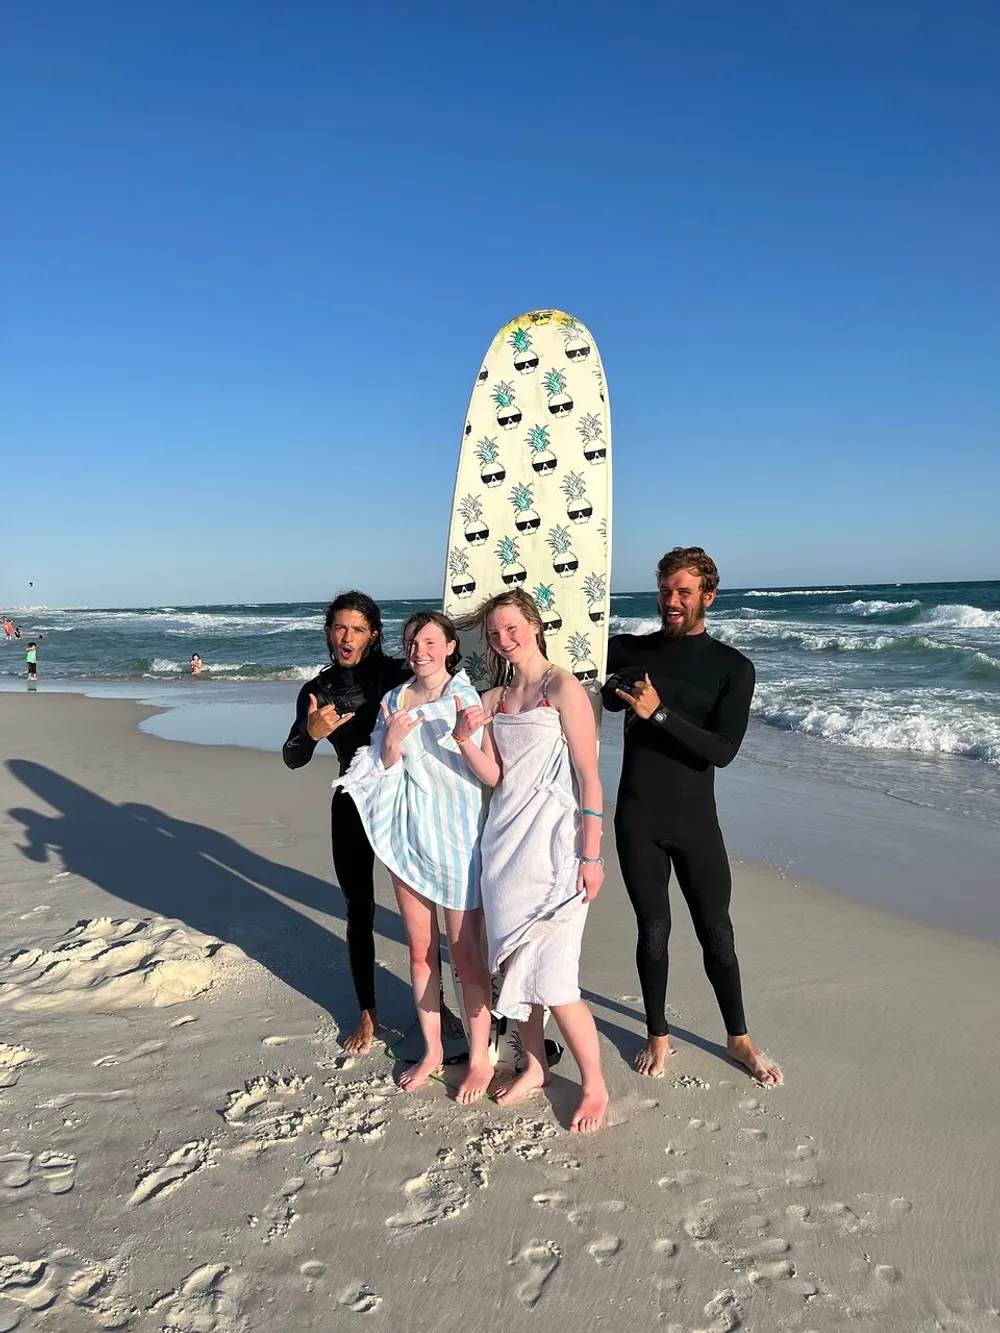 Four people are posing with a surfboard on a sunny beach two of them wrapped in towels and two wearing wetsuits all seemingly joyful